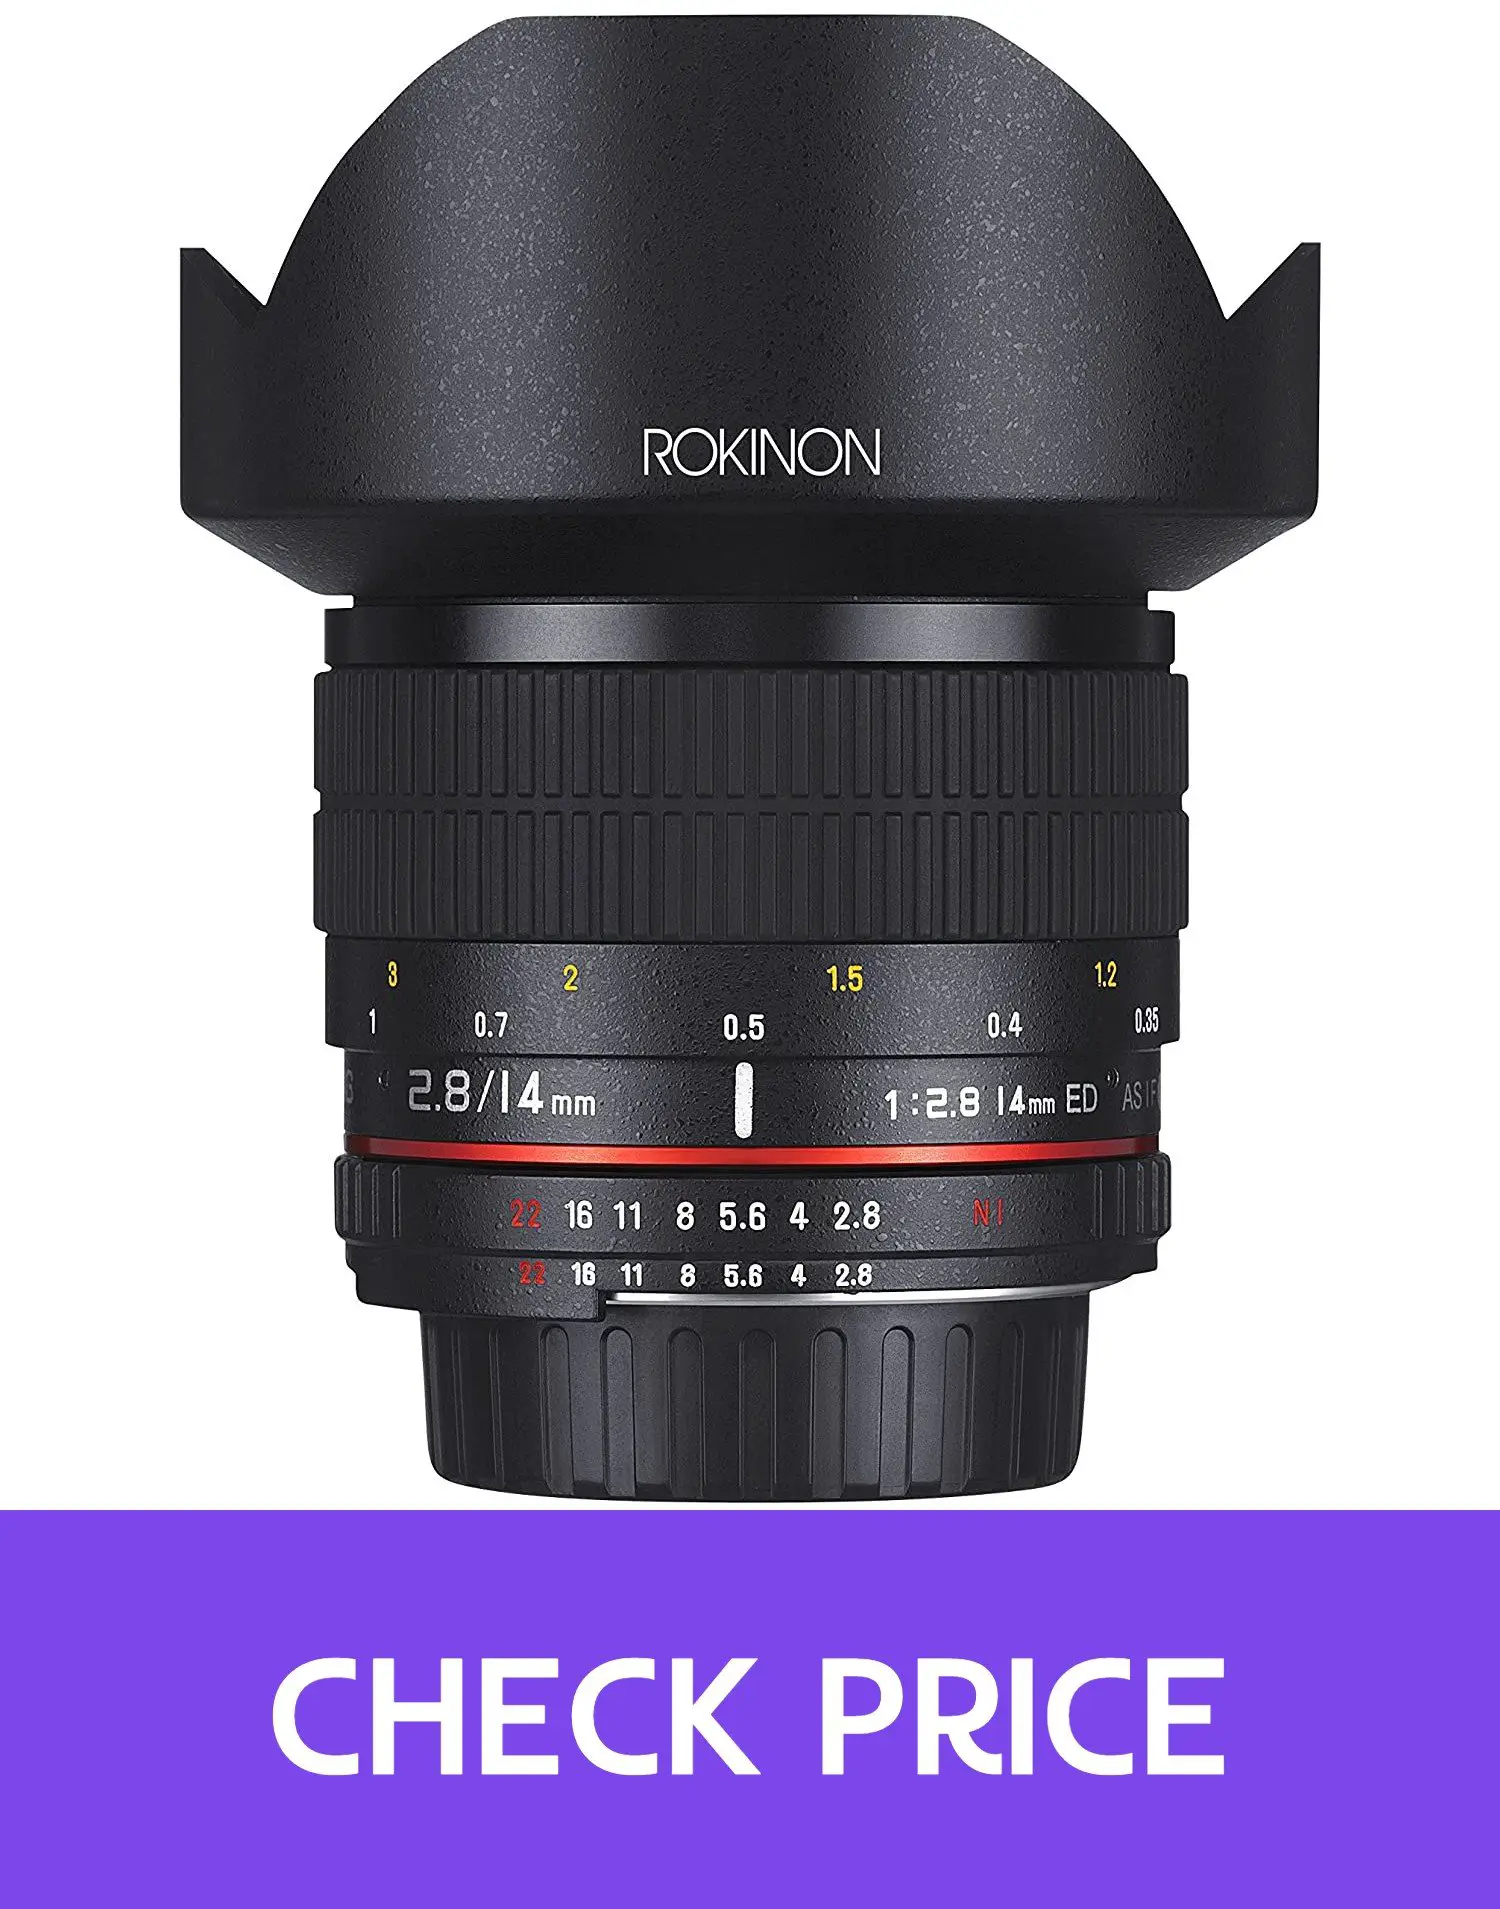 best wide angle lens for canon frame camera